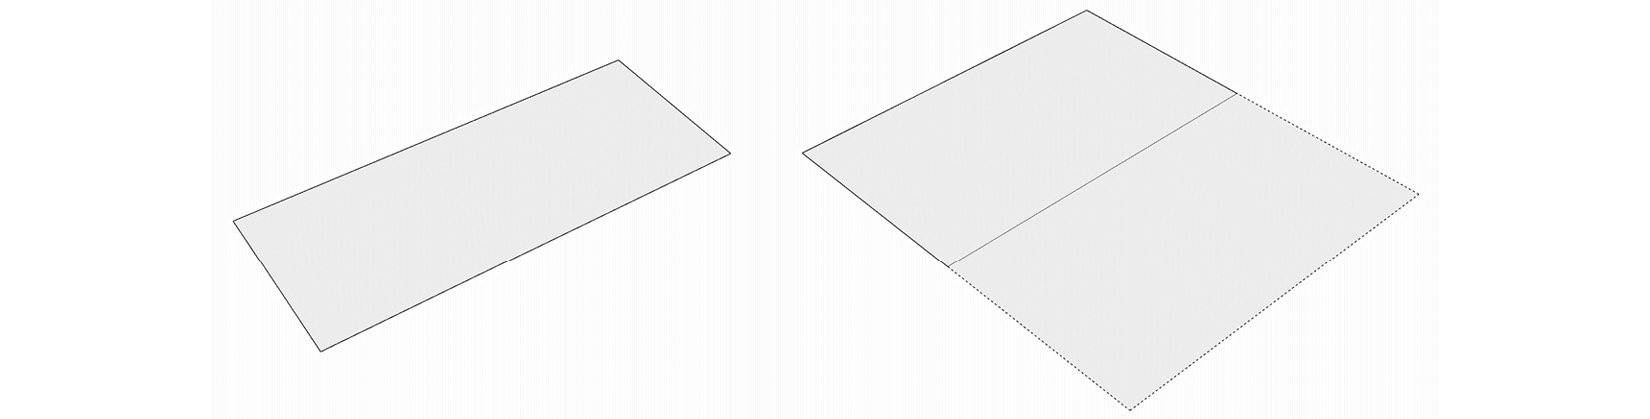 Figure 4.3 – The rectangle on the left needs to end up looking like the square on the right
